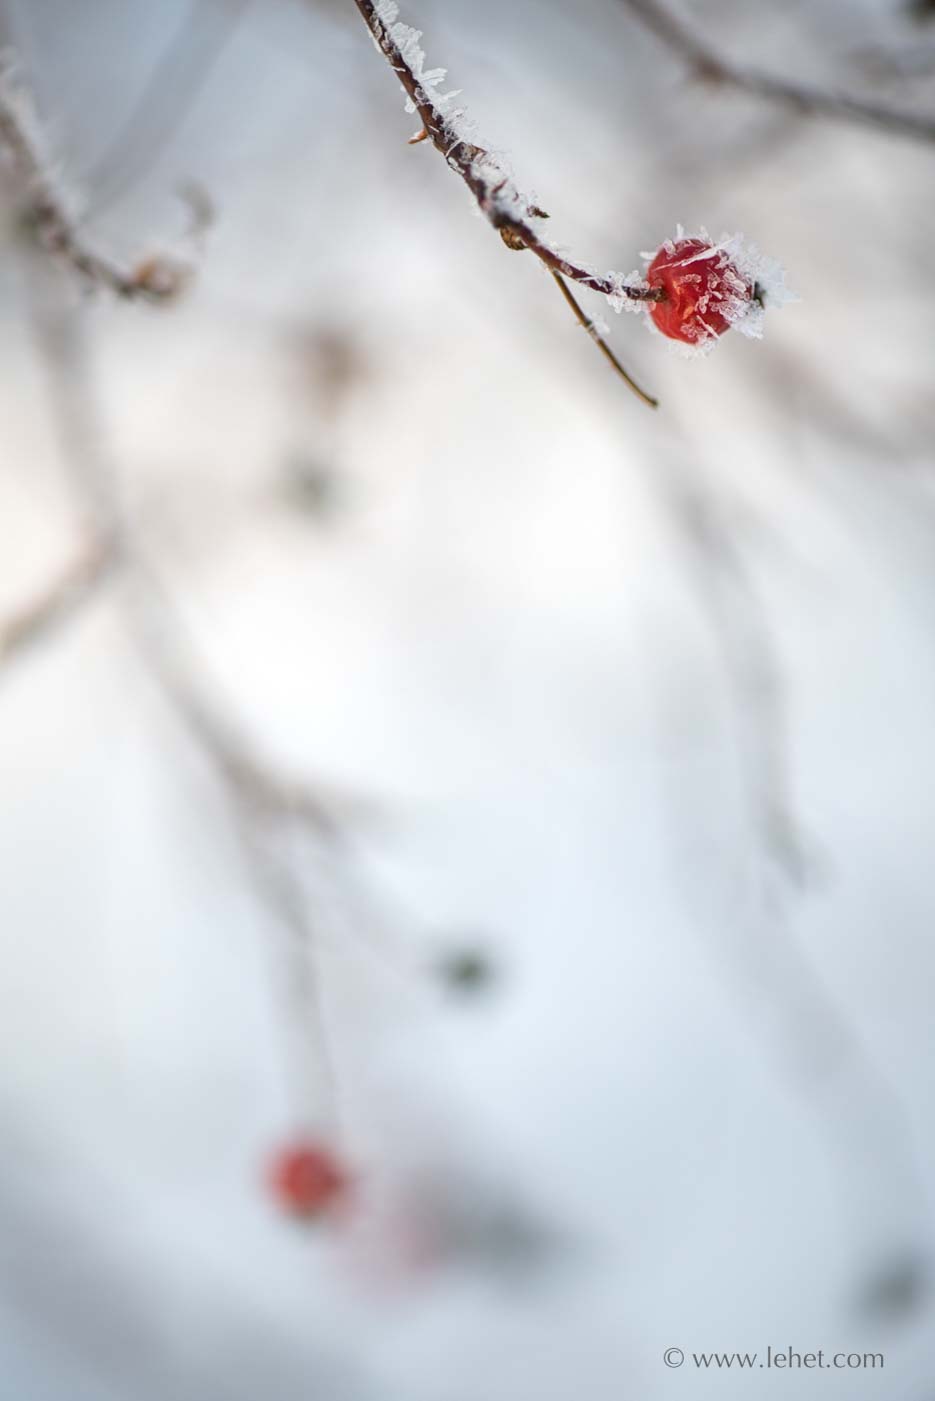 Rose Hip and Rime Ice in Fog